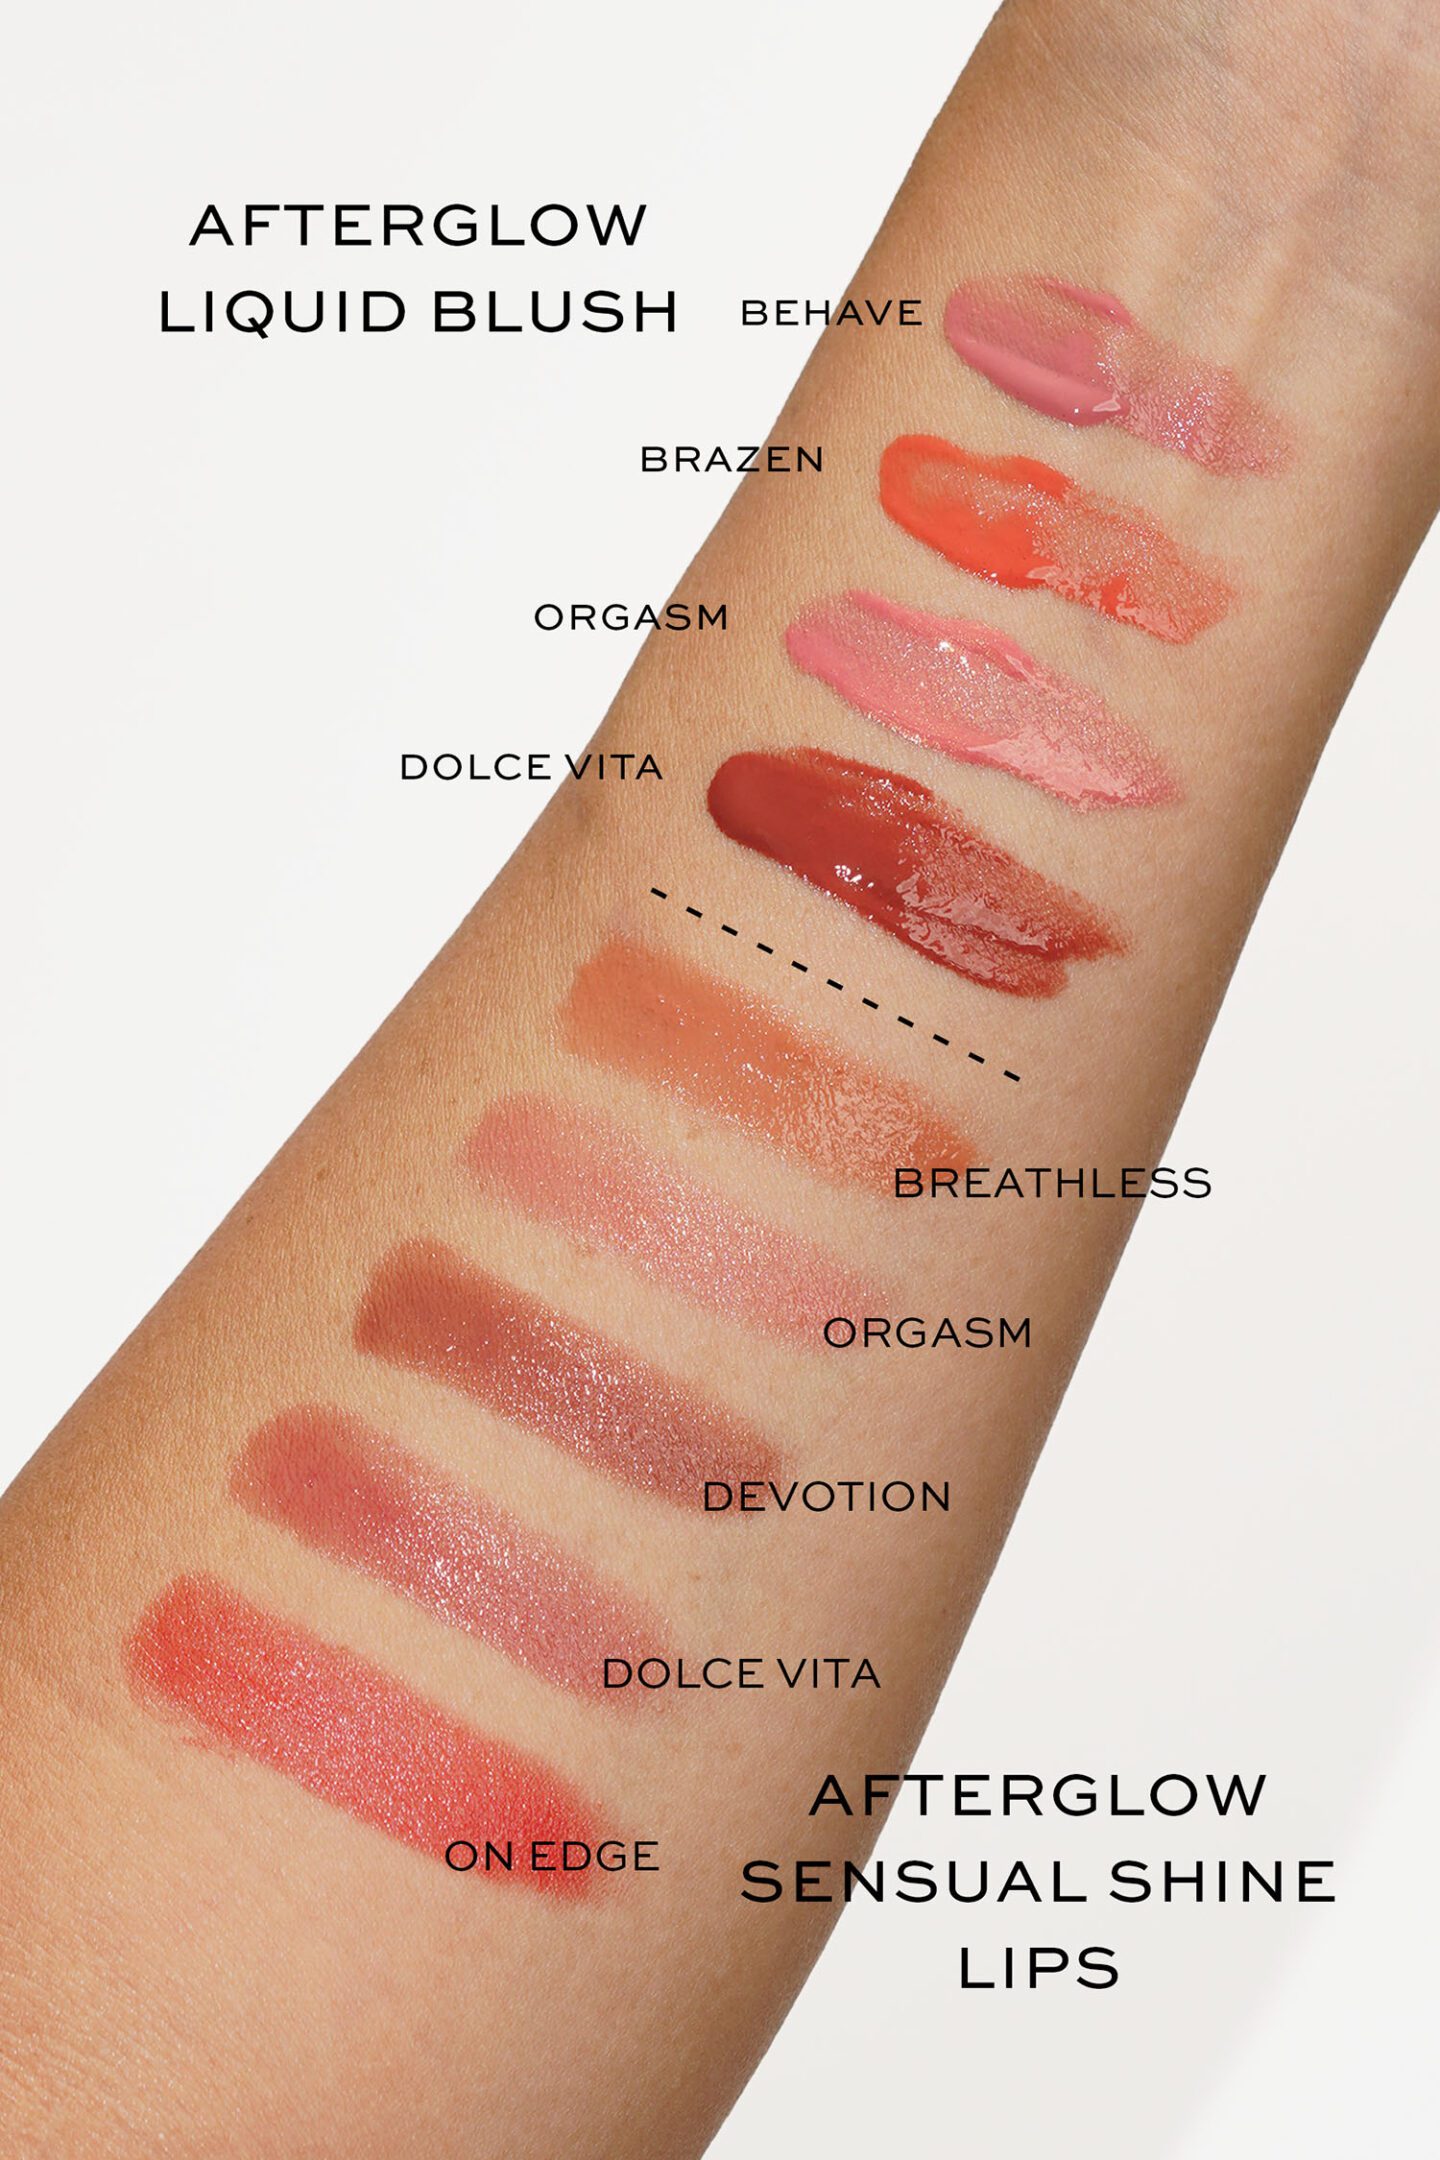 NARS Afterglow Liquid Blushes and Sensual Shine Lipstick swatches